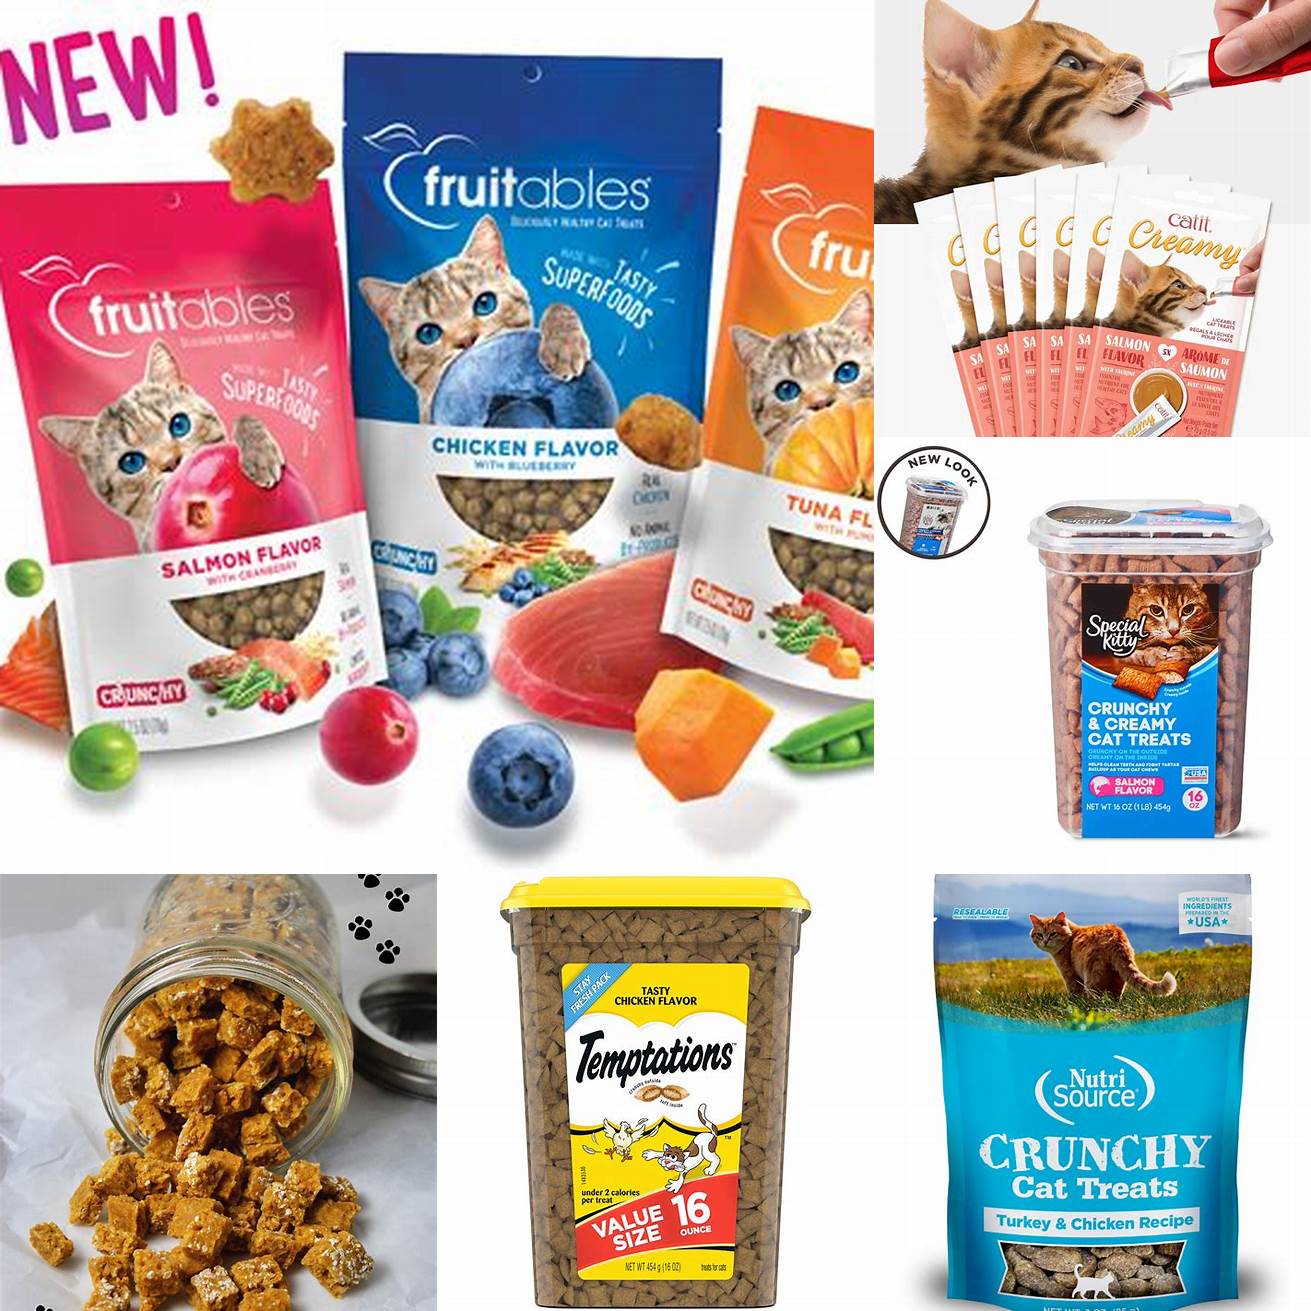 Cat treats If youre looking for a tasty snack to give your cat there are plenty of healthy and safe treat options available